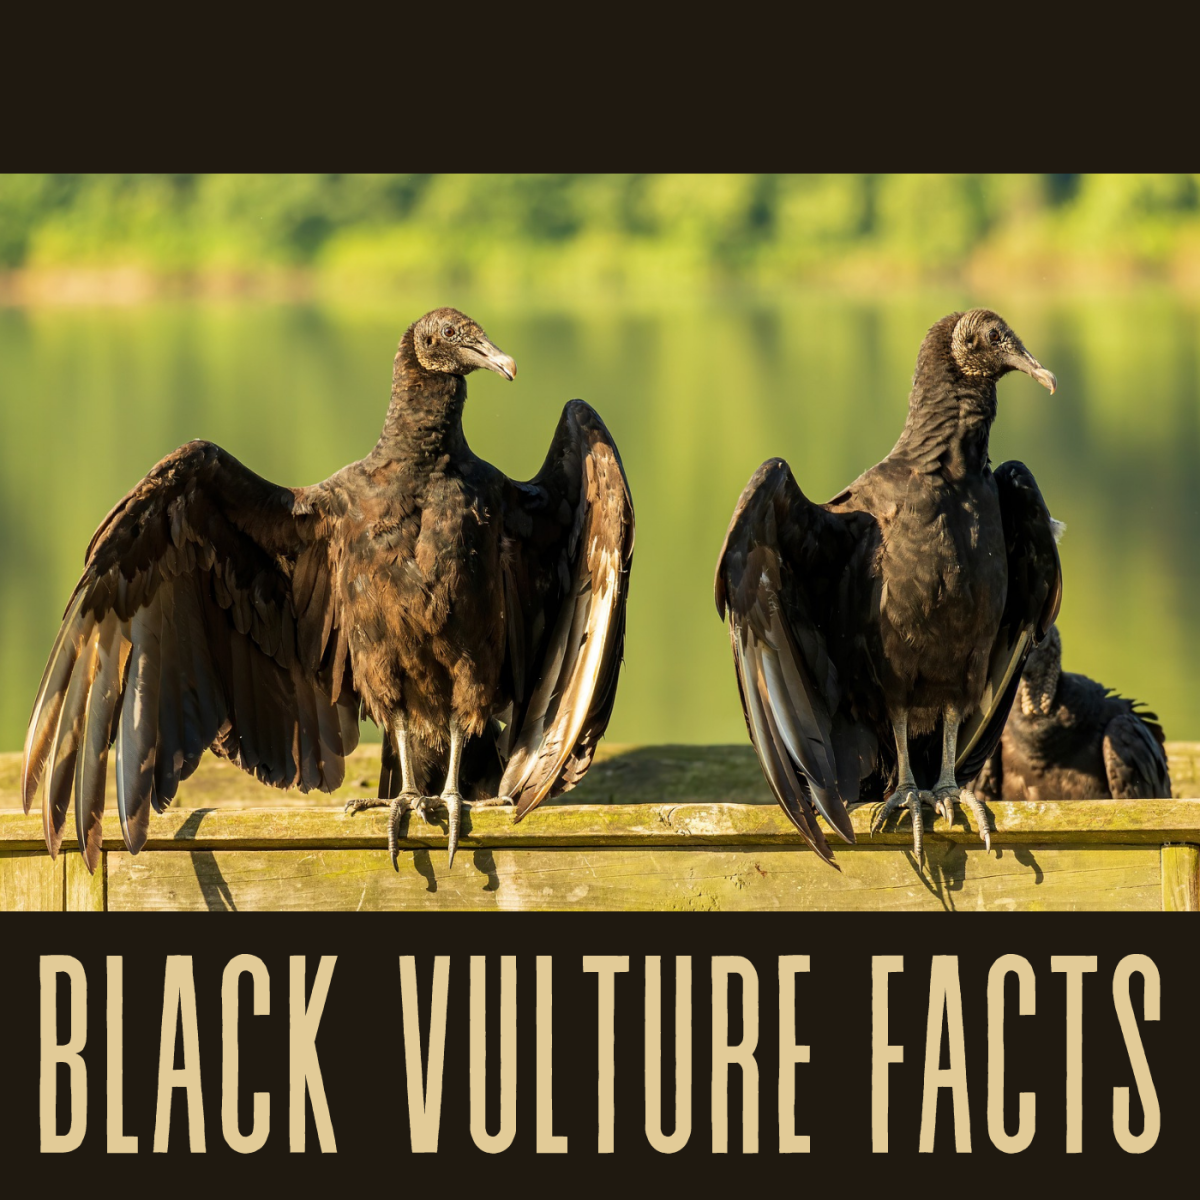 Key Facts About American Black Vultures